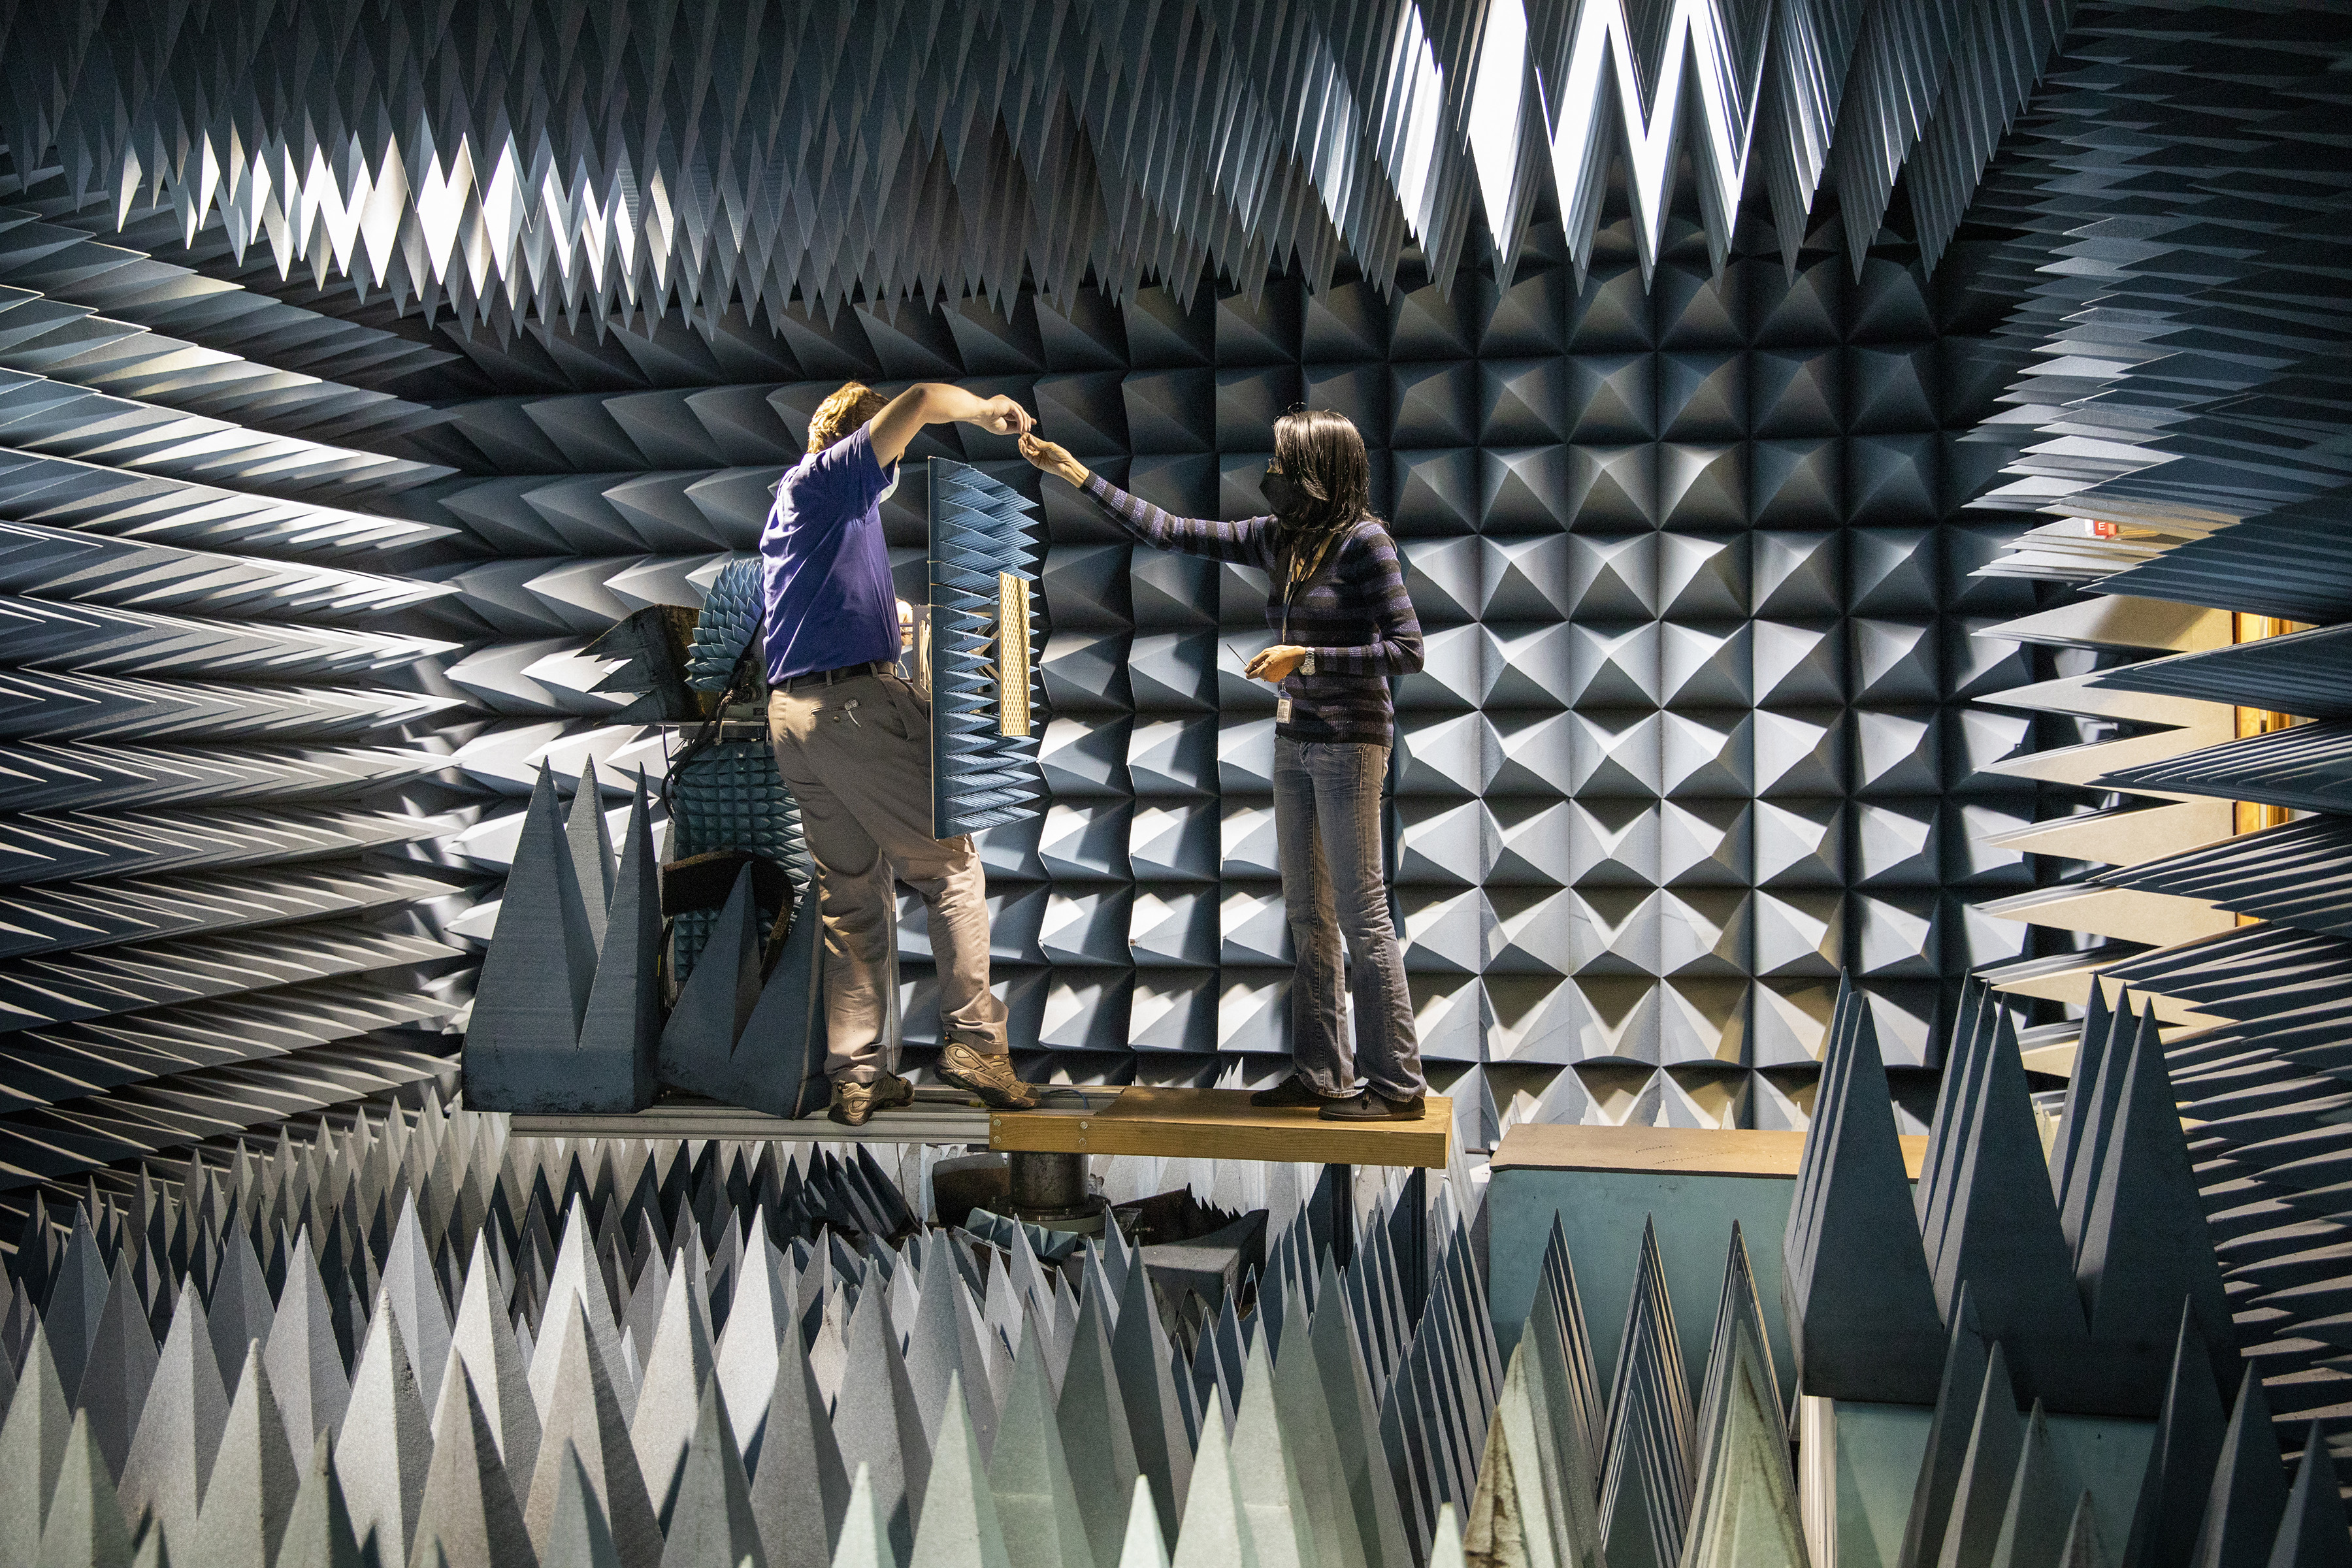 Antenna radiator pattern being tested in GTRI's anechoic chamber